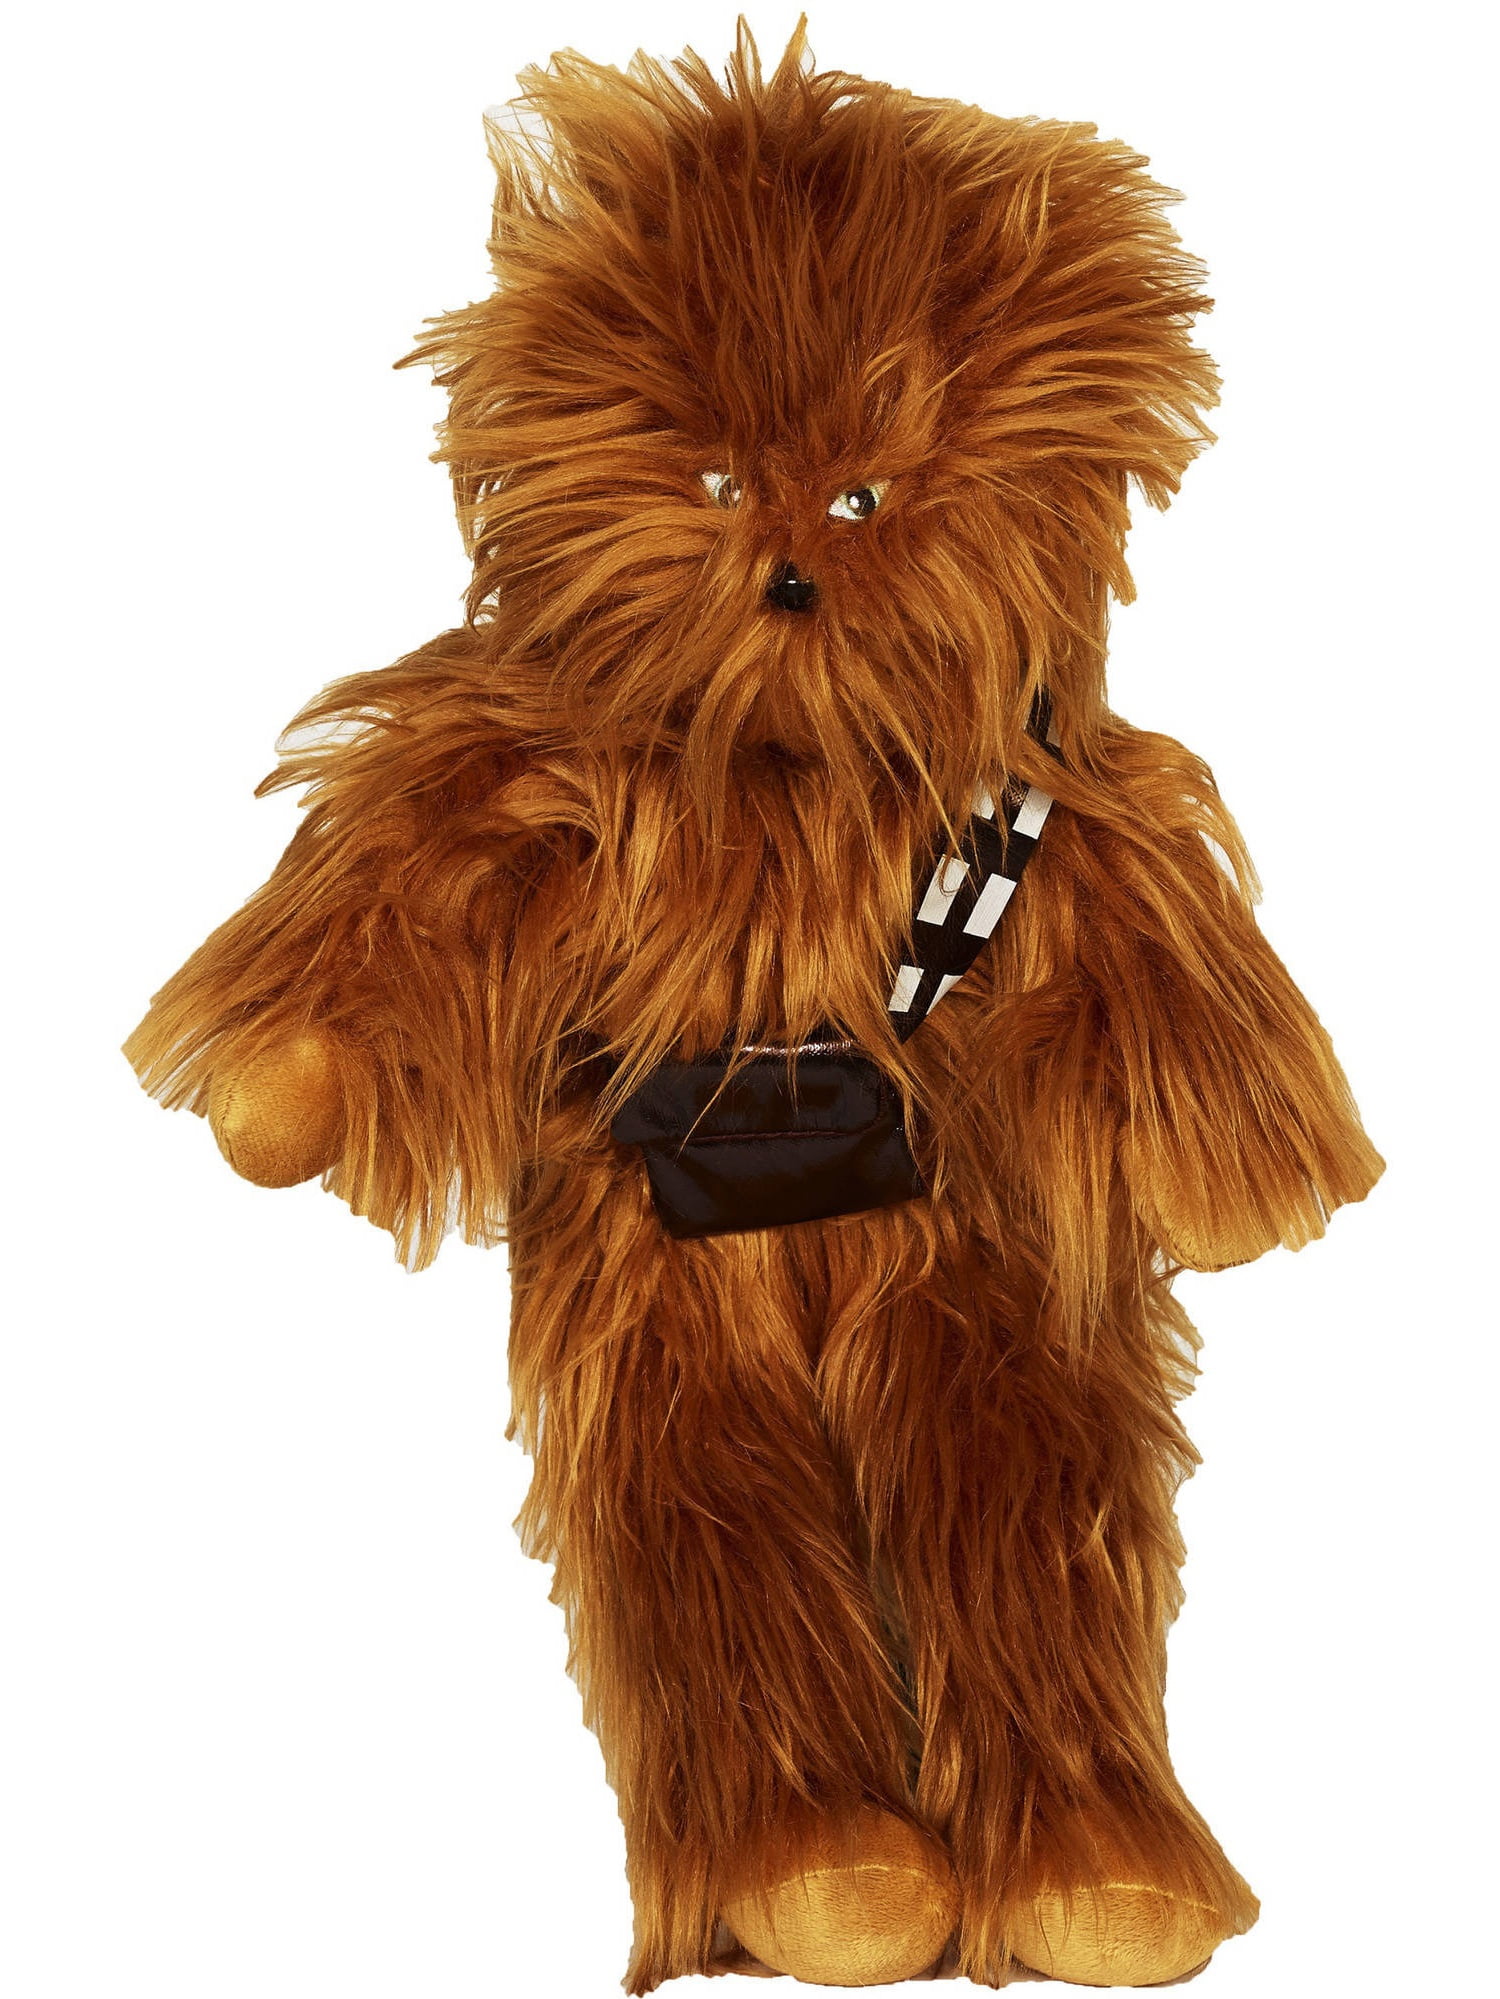 SCS Direct Star Wars Solo Movie Chewbacca Interactive Walk N Roar 12 Plush Makes Wookiee Talking Sounds and Walks Seven20